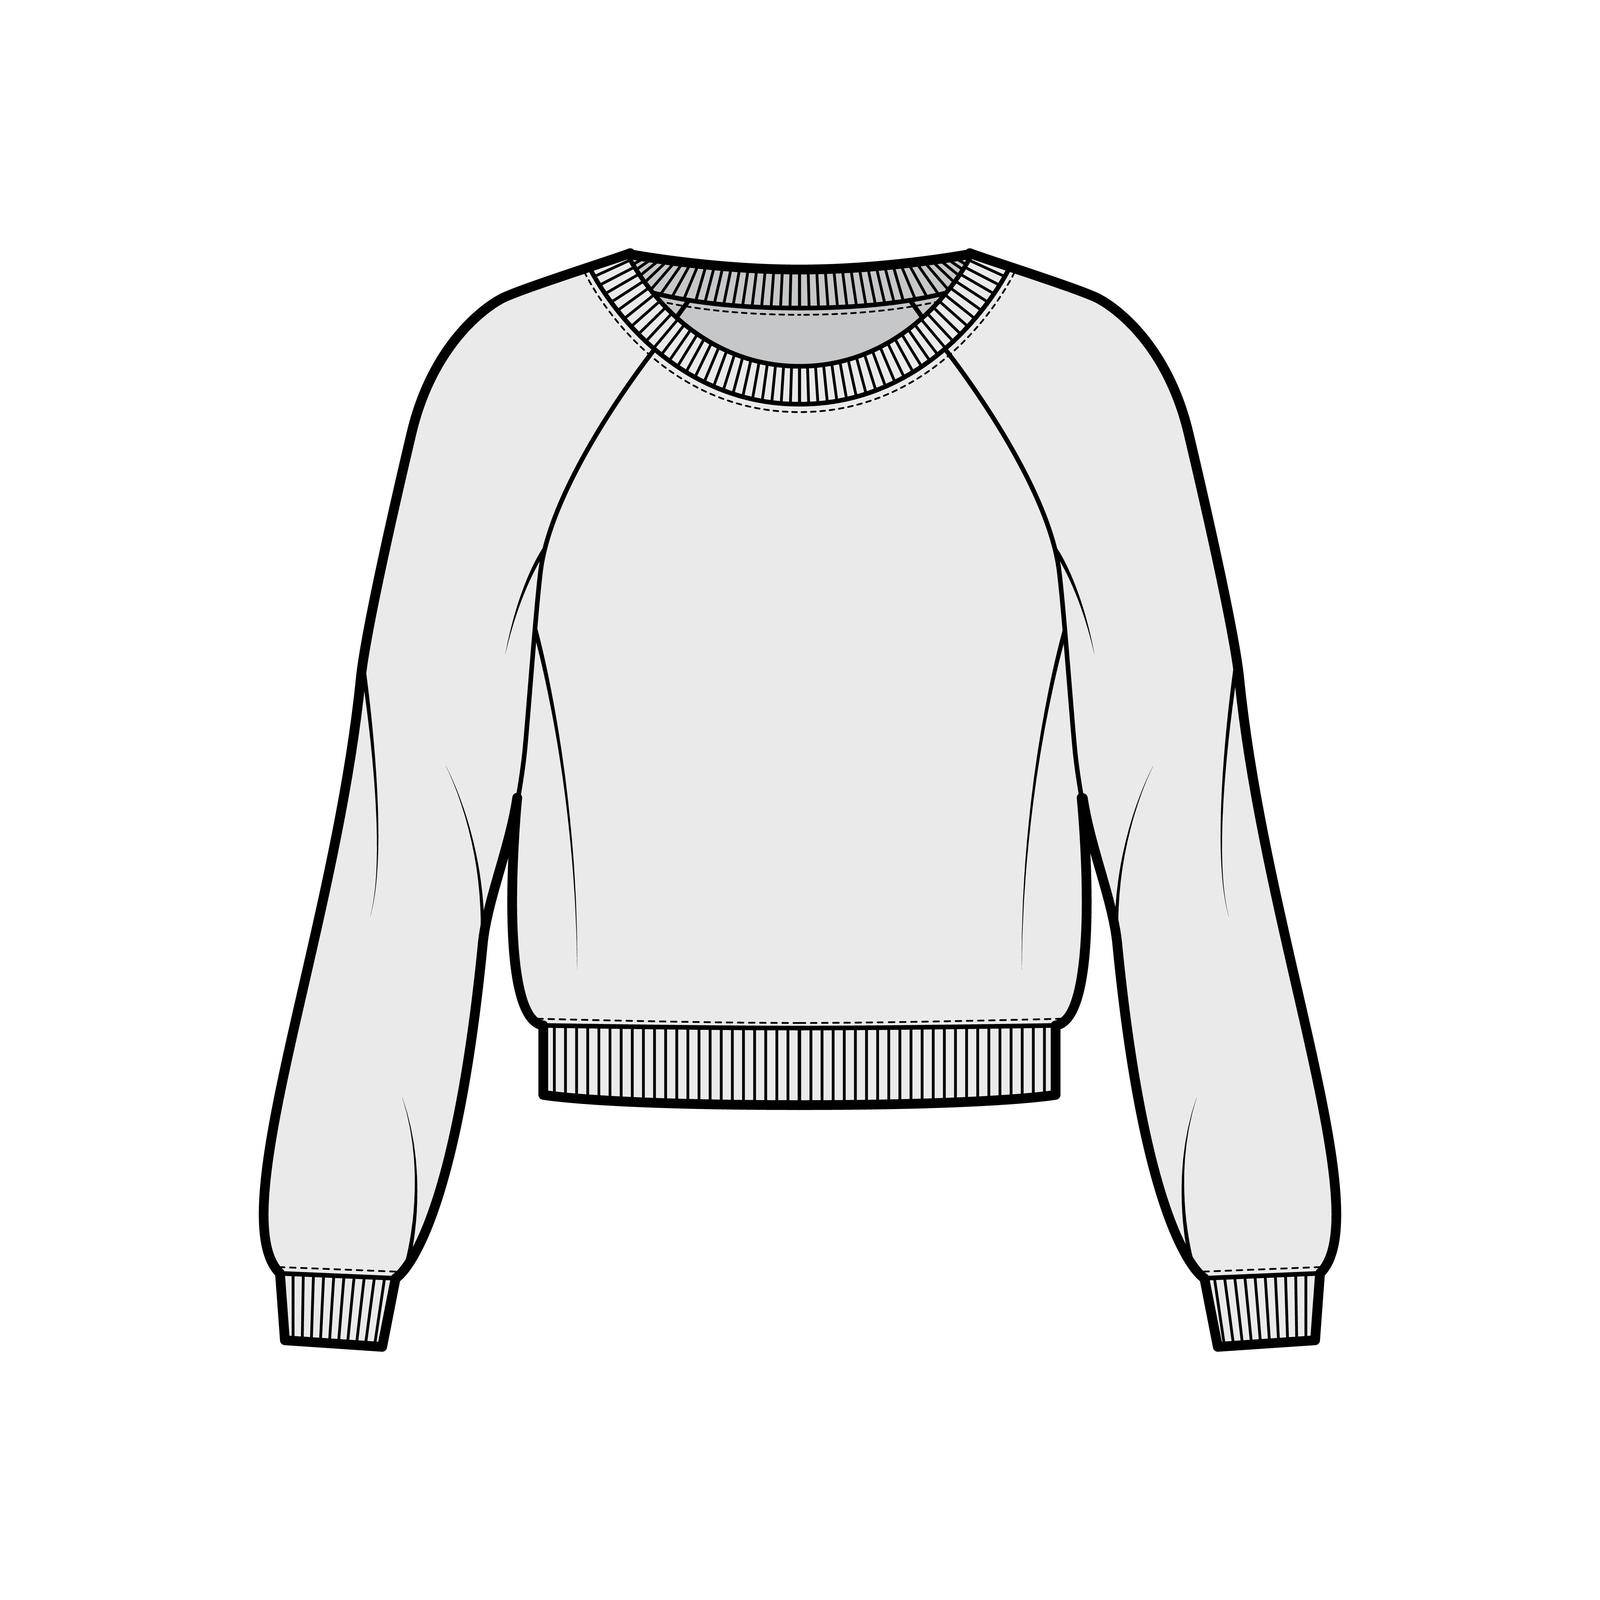 Cotton-terry sweatshirt technical fashion illustration with relaxed fit, scoop neckline, long raglan sleeves ribbed trim by Vectoressa